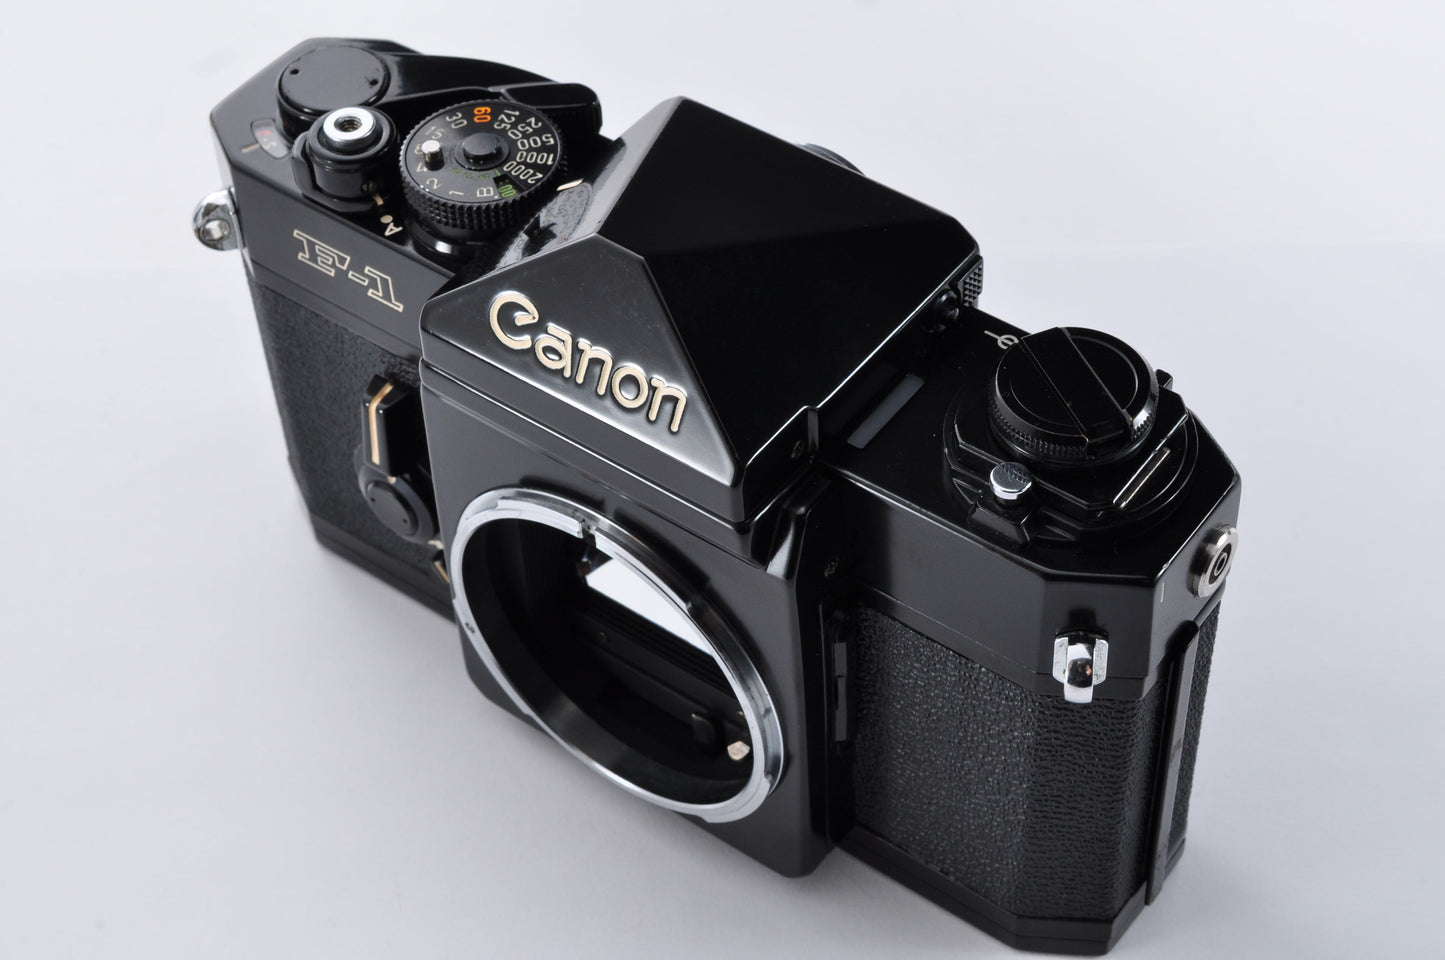 Canon F-1 Early model SLR 35mm Film Camera FD 50mm f/1.4 S.S.C. SSC "O" From Japan #214762